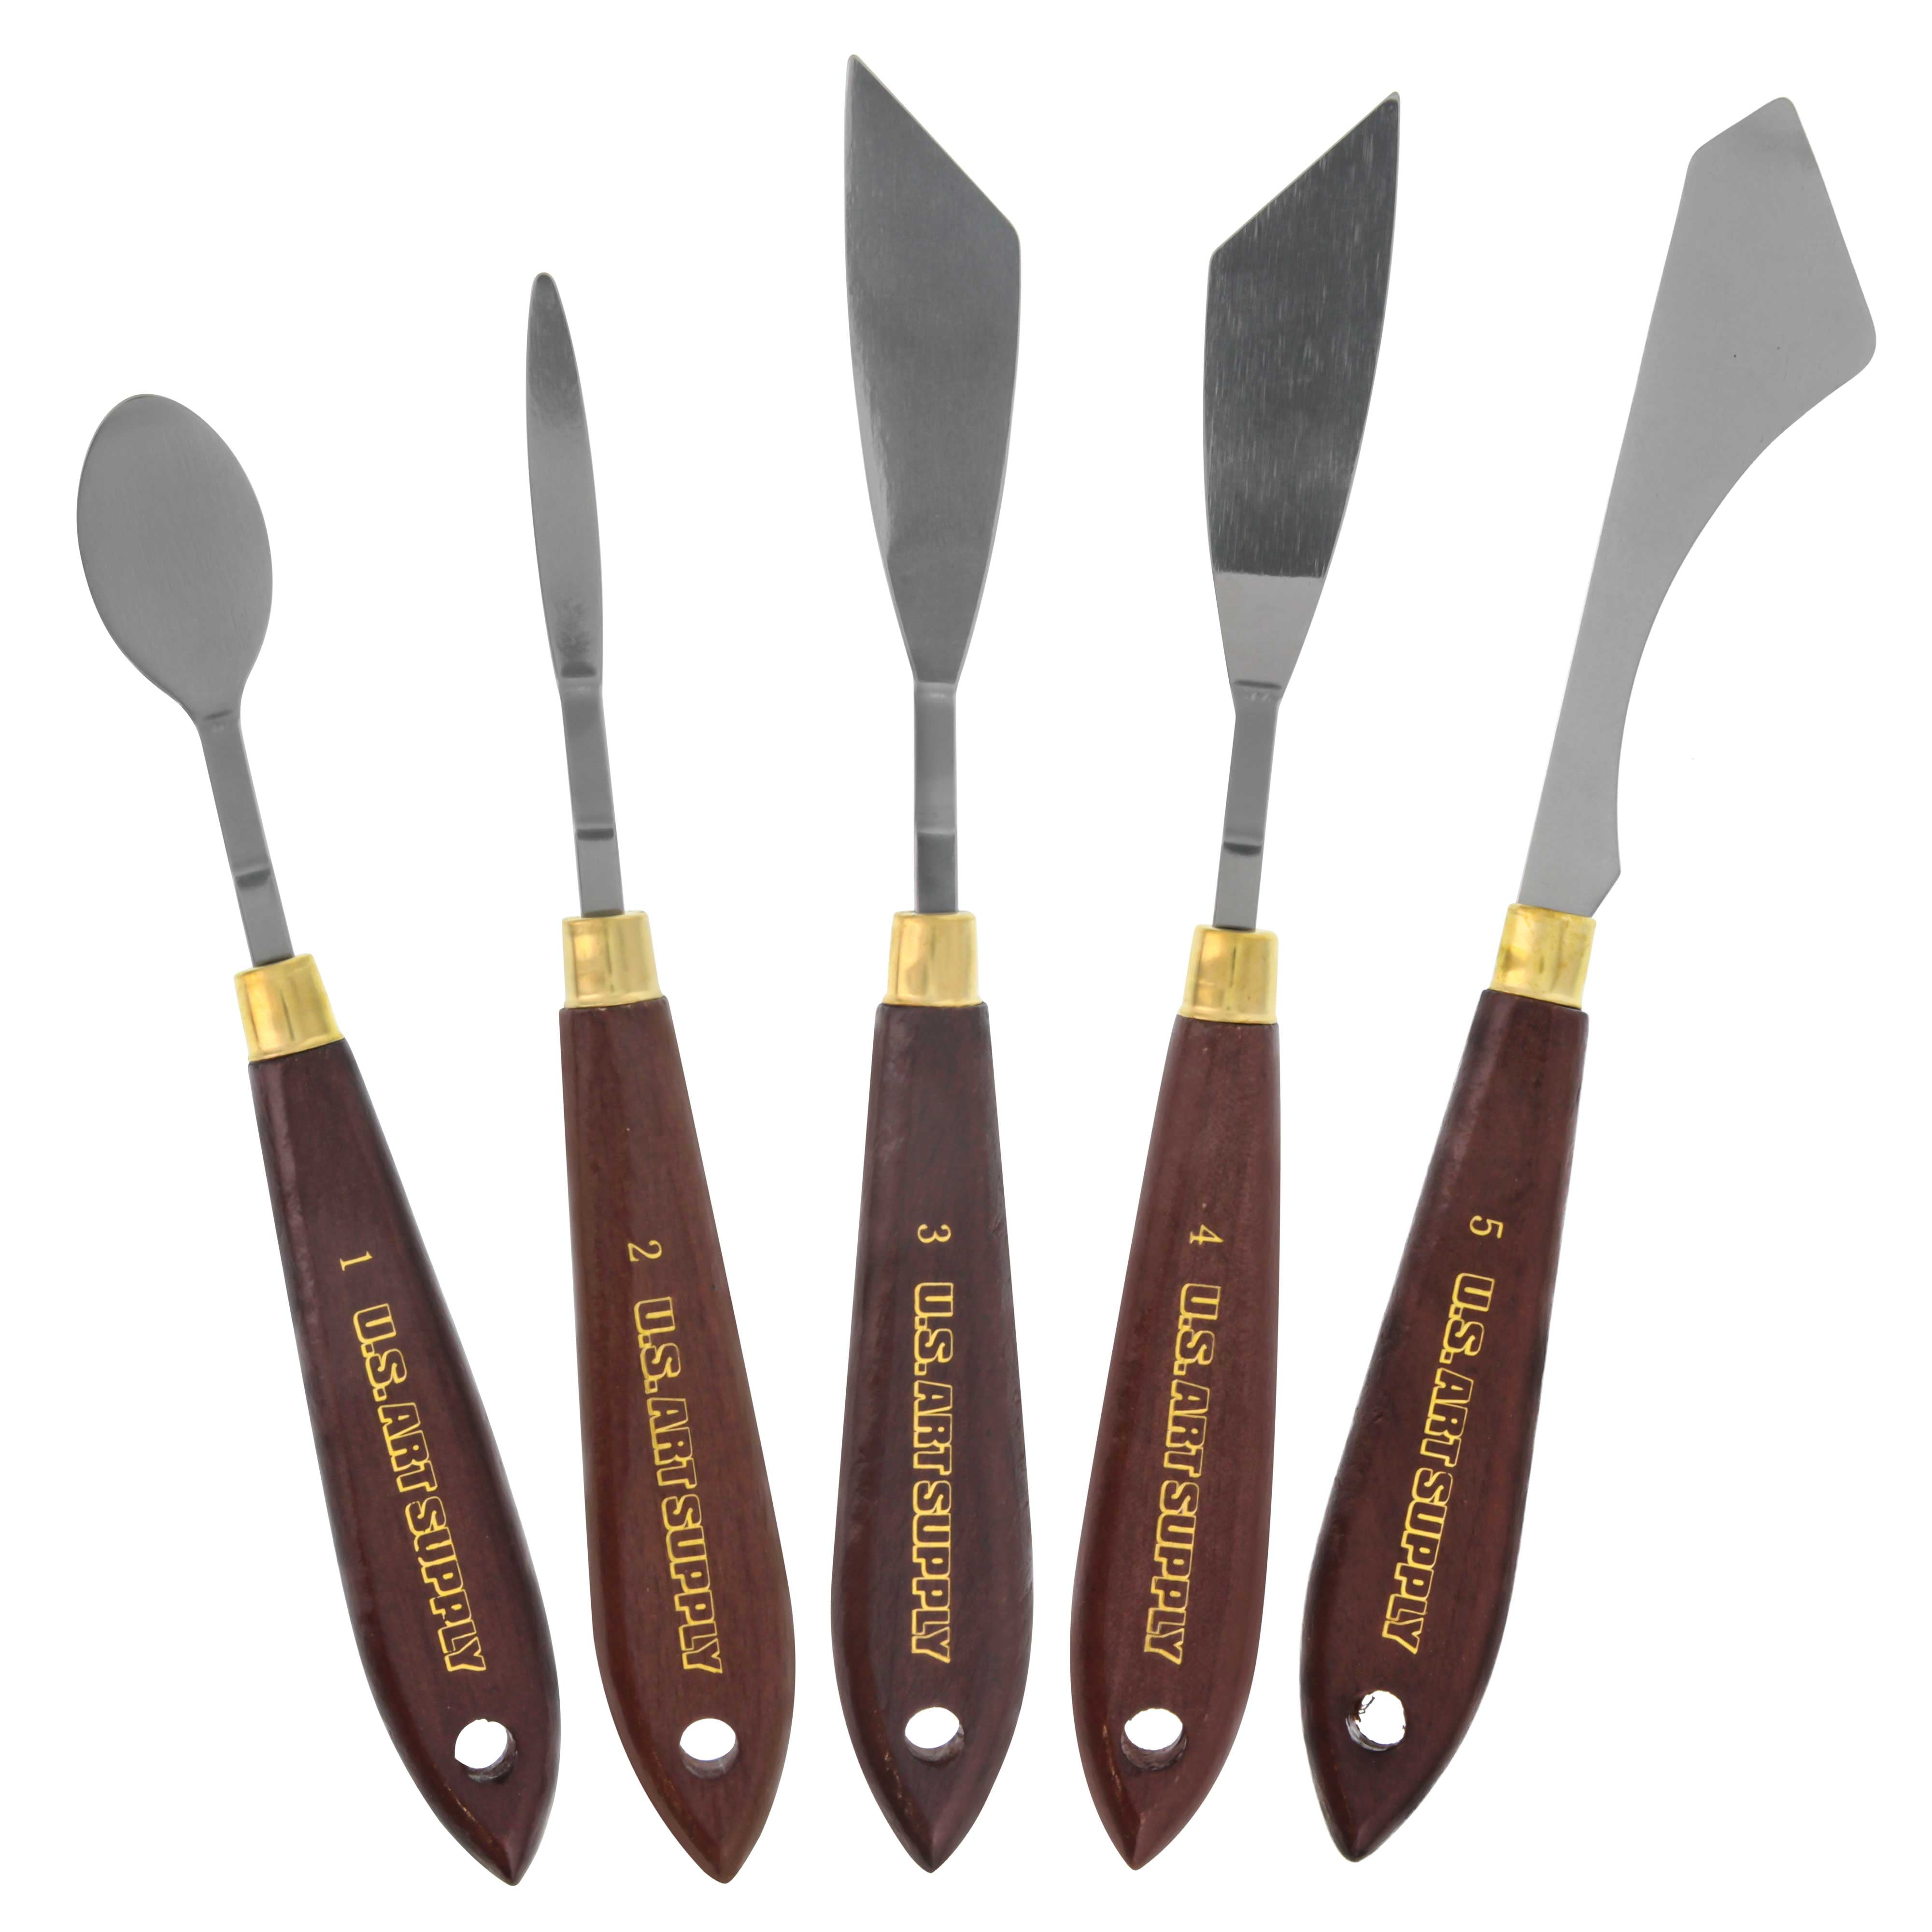 Buy Online Qatalitic Set of 5 Palette Painting Knives of Various Sizes